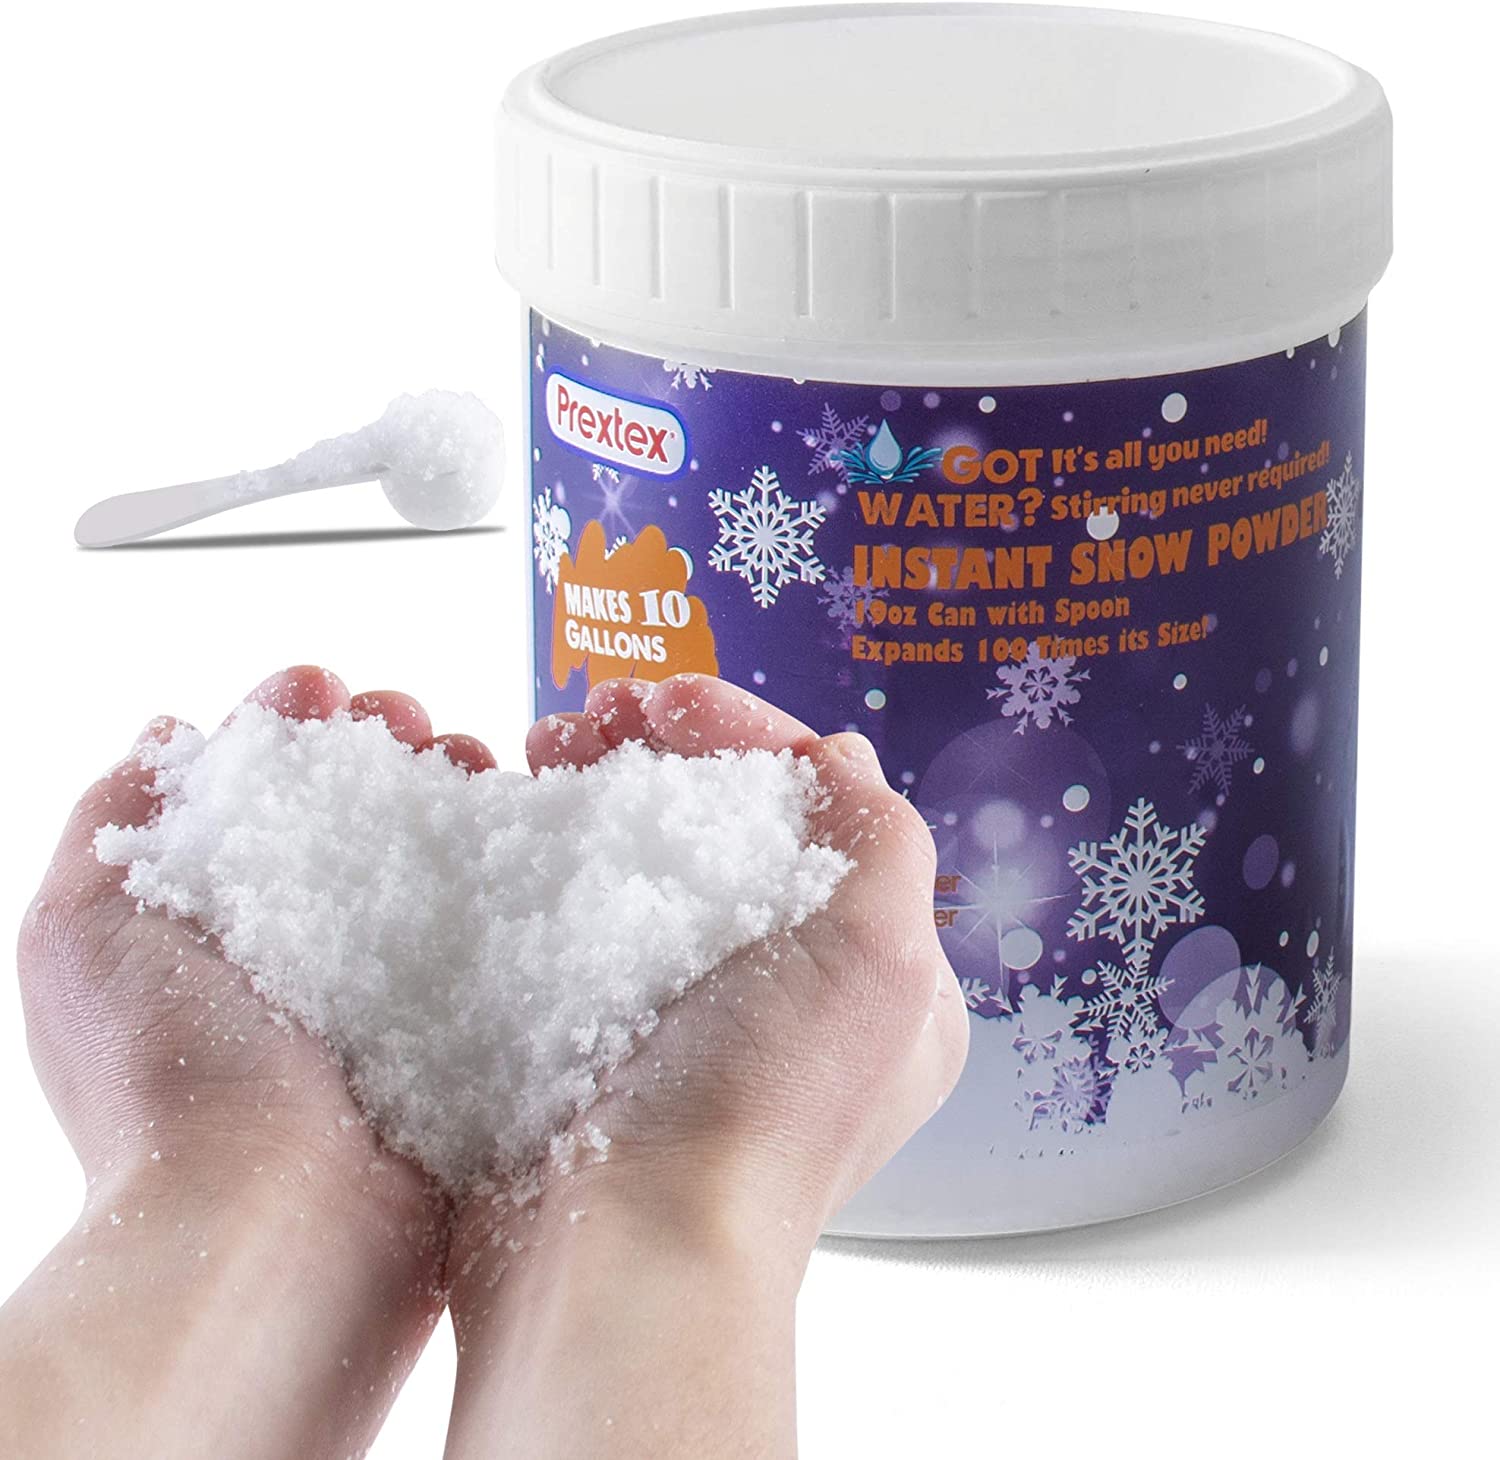 Be Amazing Instant Snow Powder 16 oz Great for Slime Party Pack makes 8-10 gals 